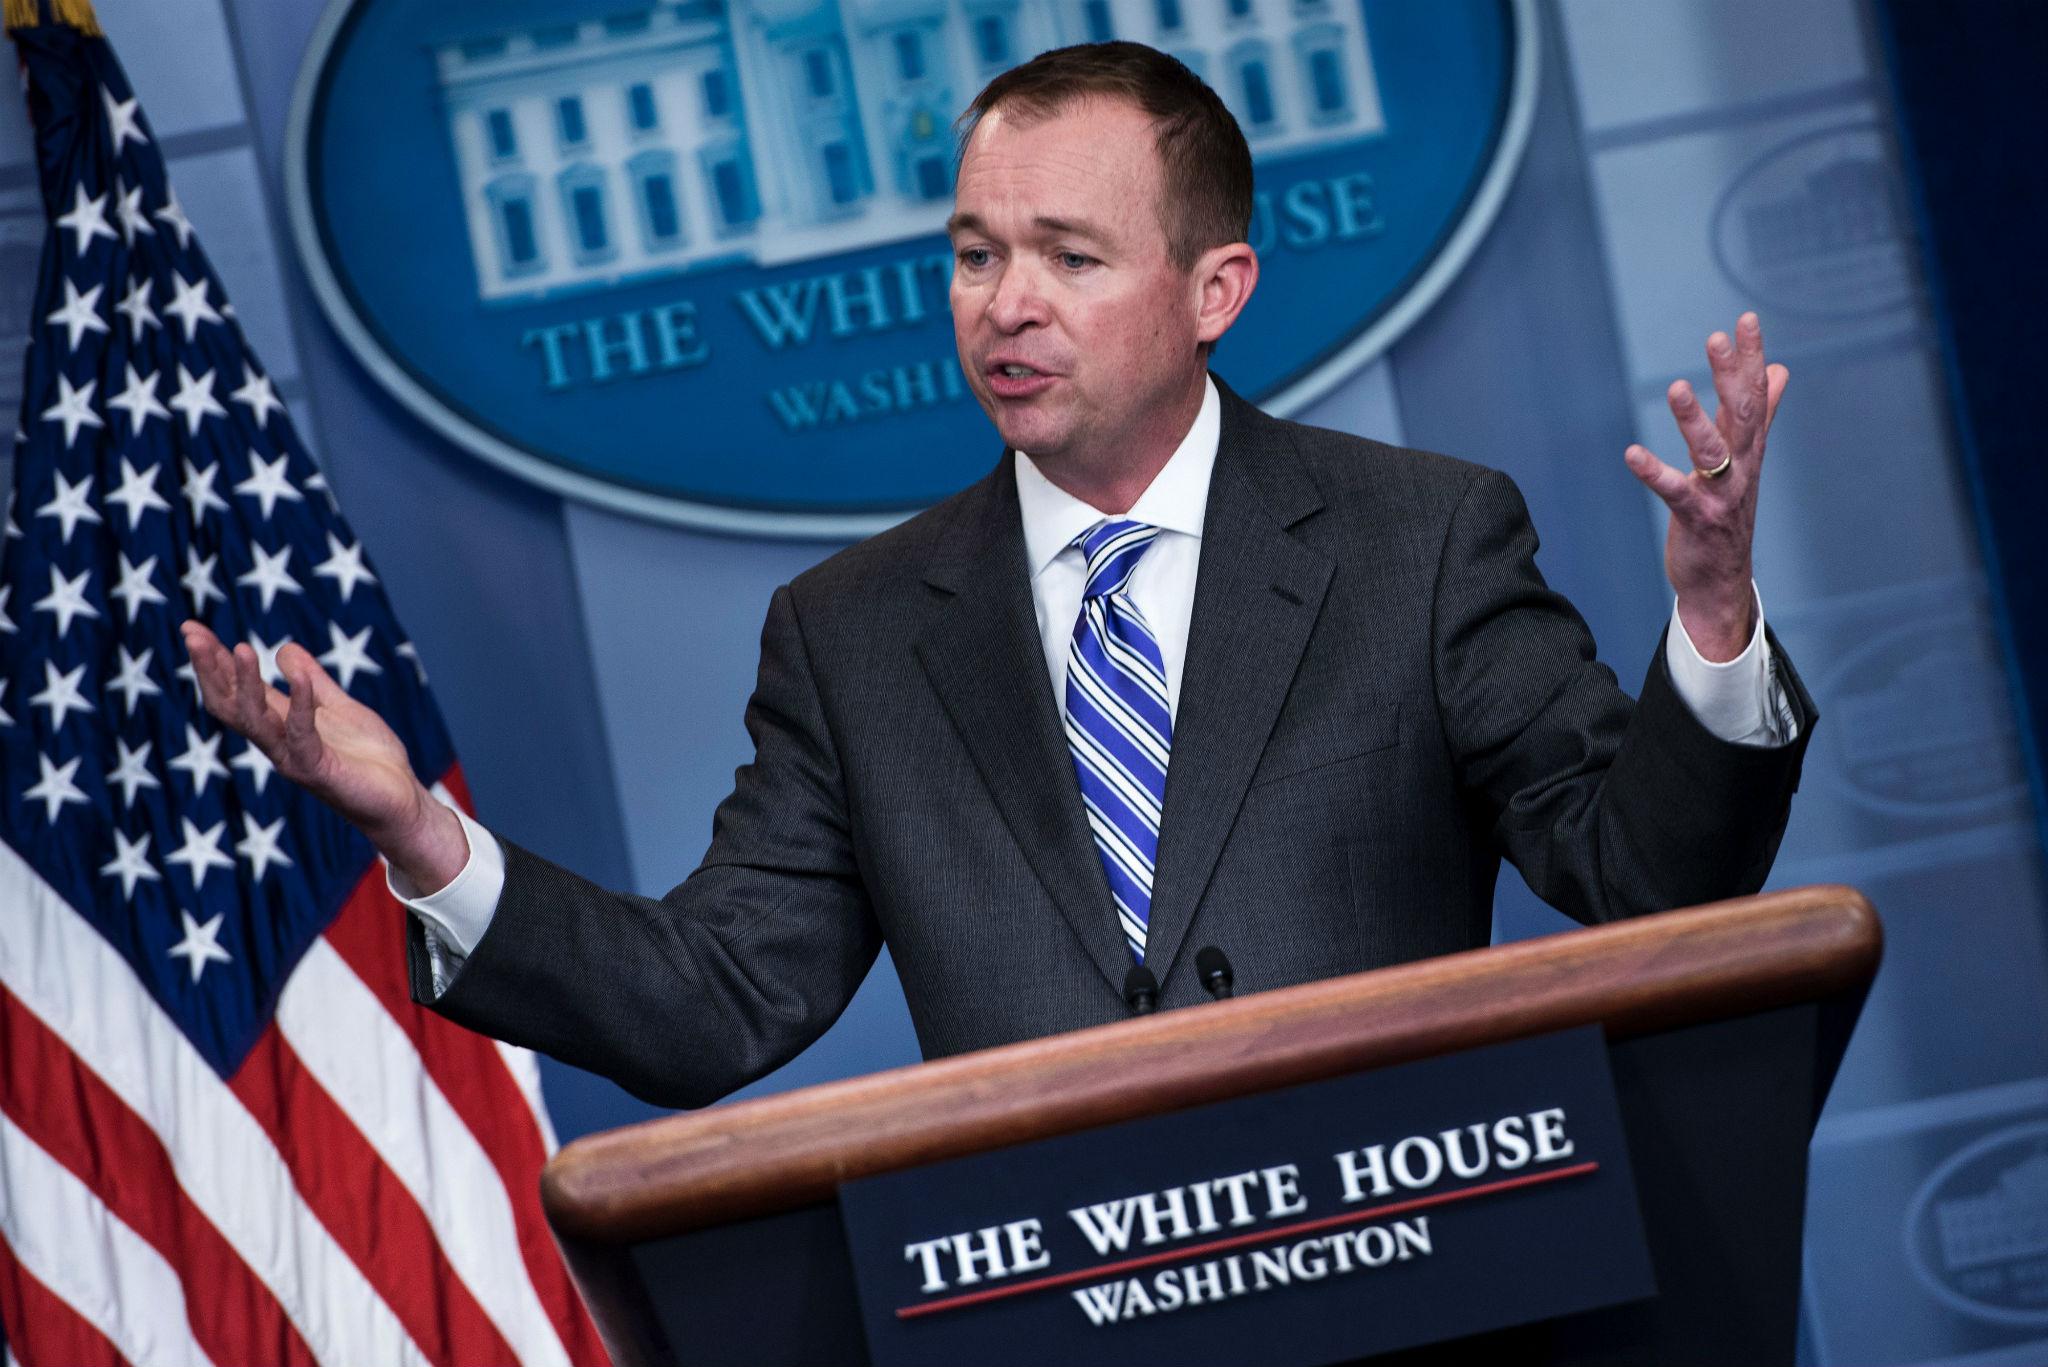 ProPublica obtained records on who White House Budget Director Mick Mulvaney met with (BRENDAN SMIALOWSKI/AFP/Getty Images)